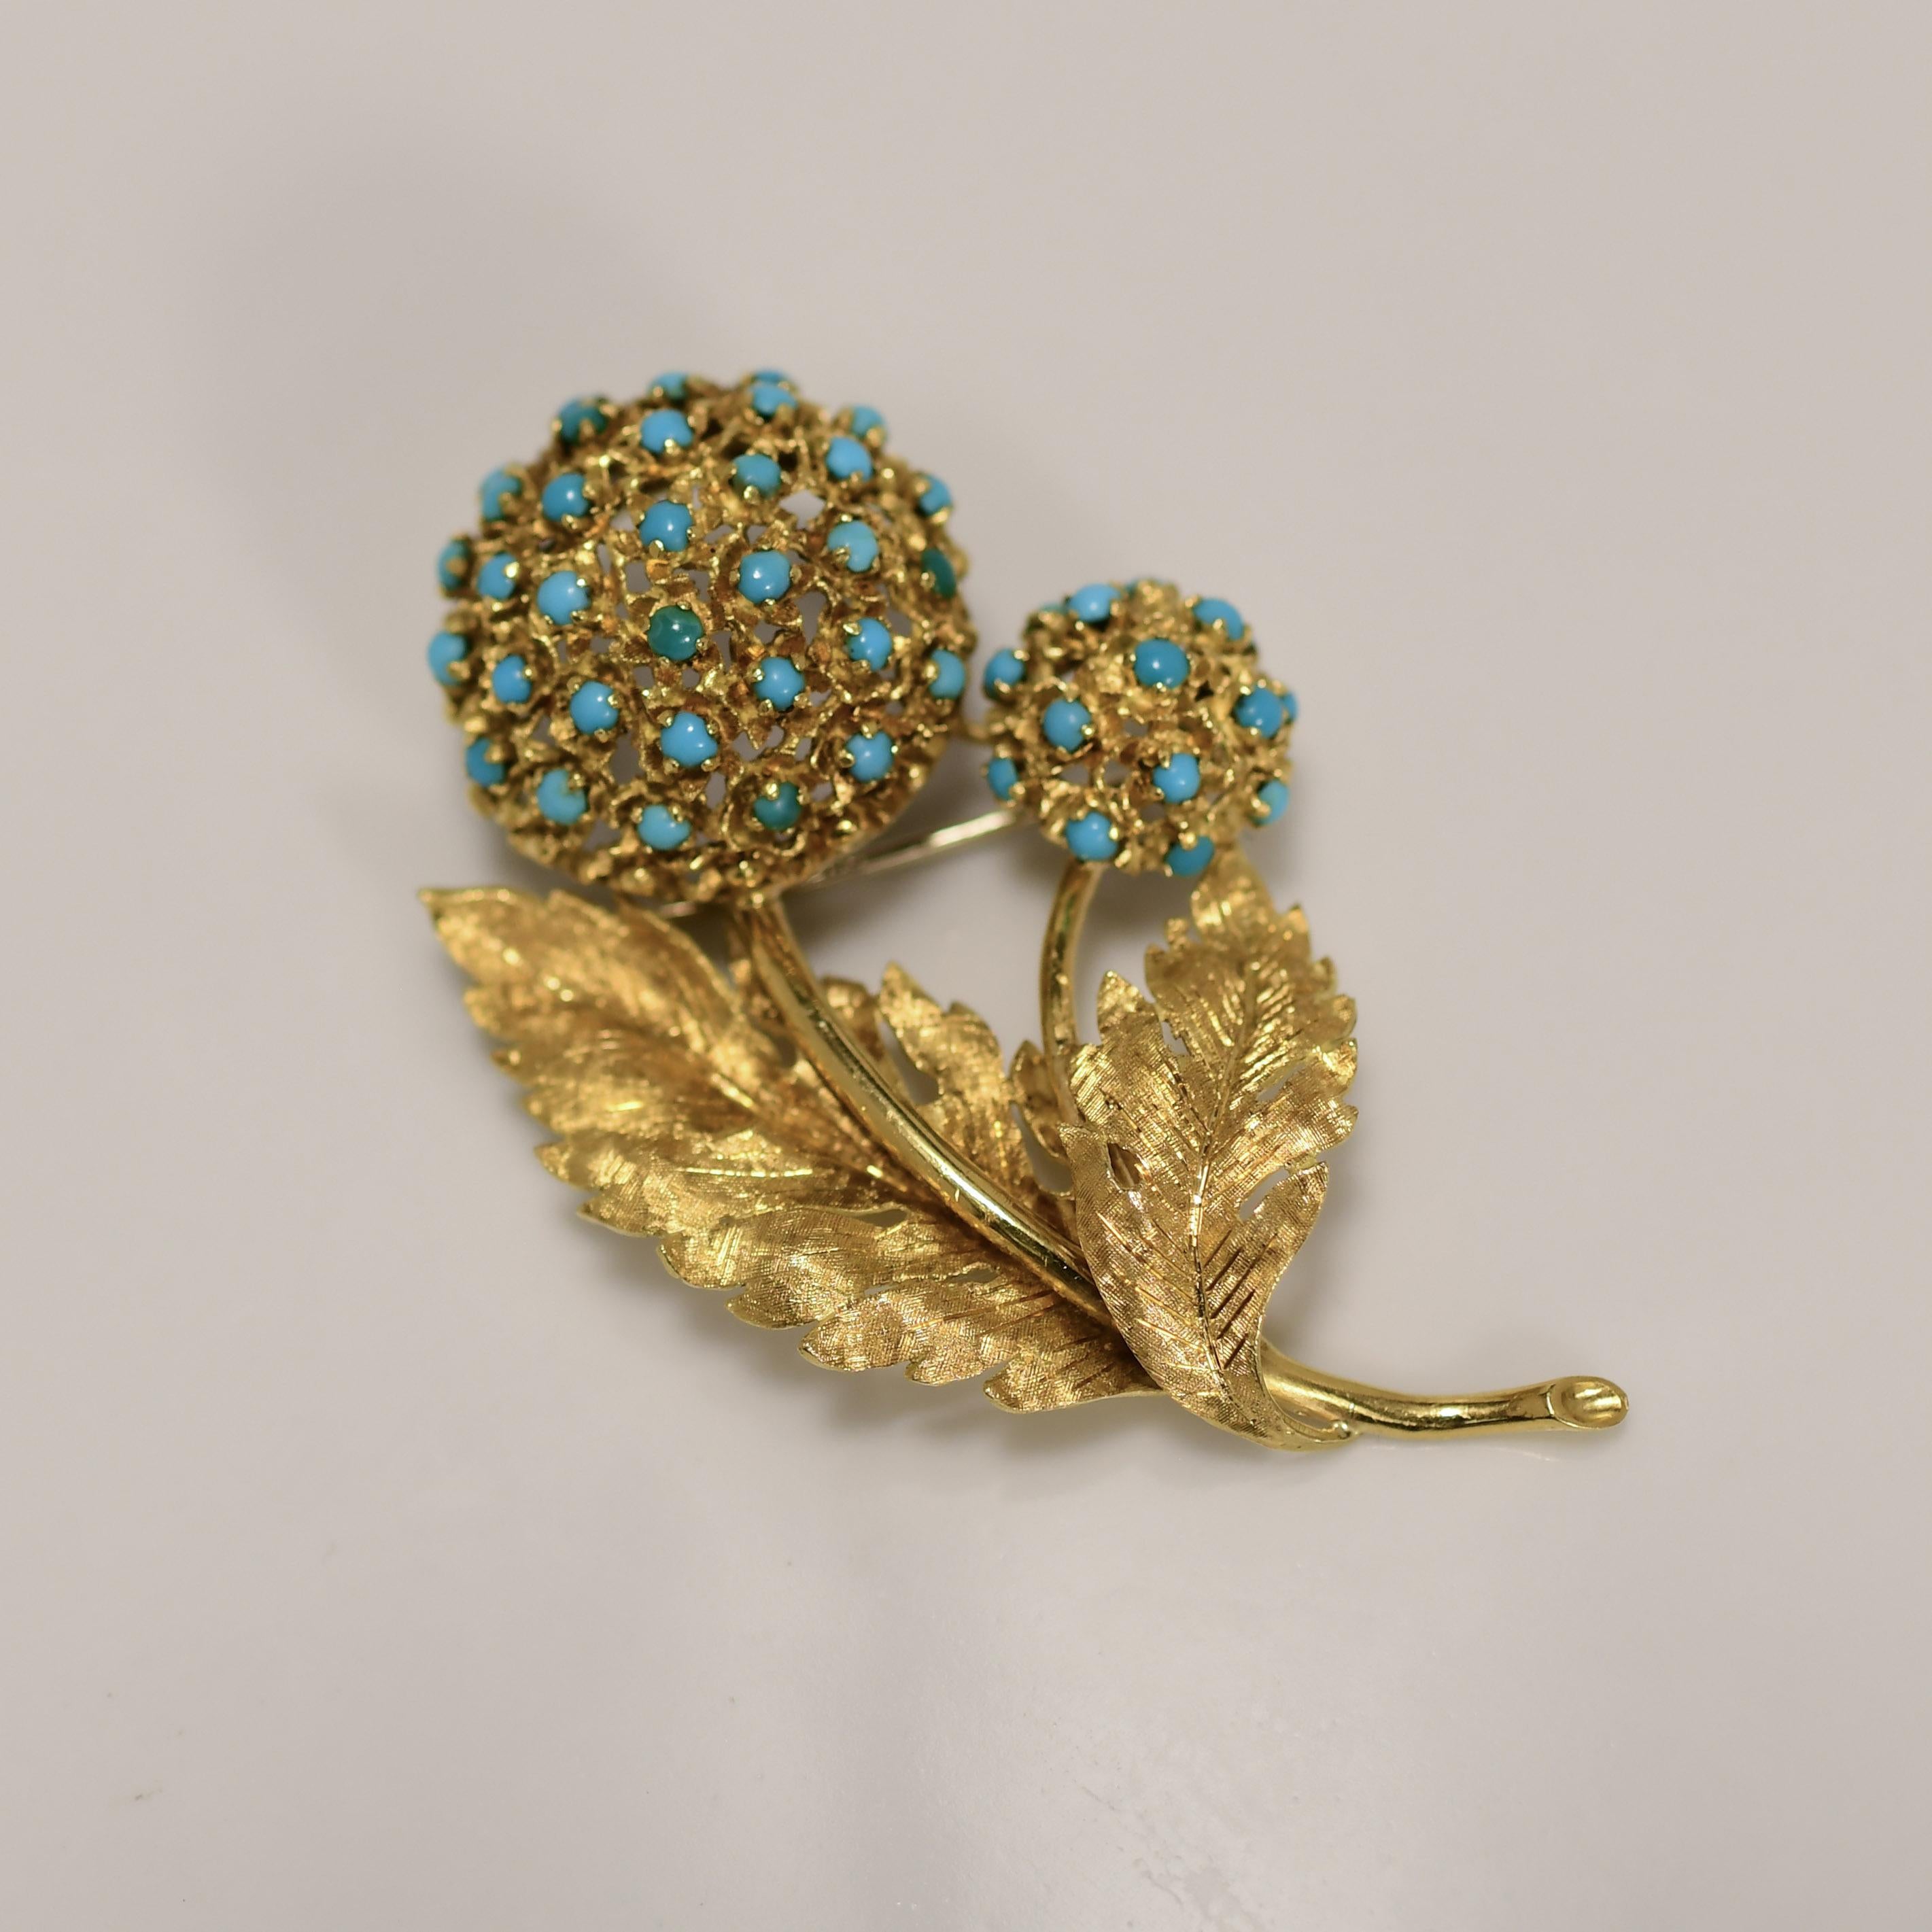 Elevate your style with this alluring 18K Vintage Turquoise Floral Brooch, hallmarked with the prestigious 